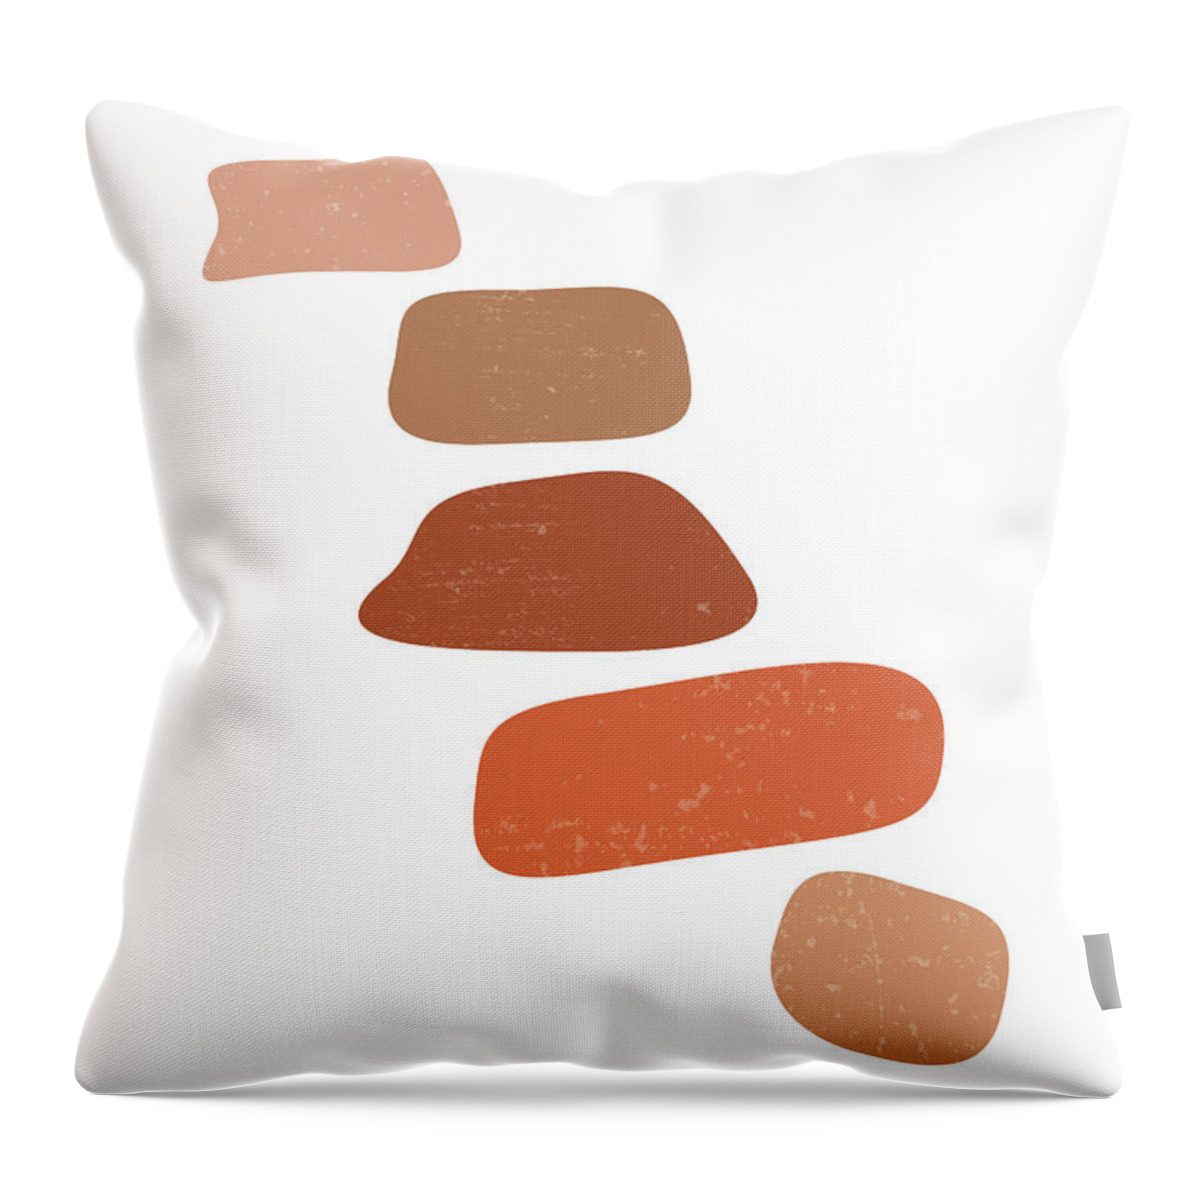 Terracotta Throw Pillow featuring the mixed media Terracotta Abstract 17 - Modern, Contemporary Art - Abstract Organic Shapes - Brown, Burnt Orange by Studio Grafiikka